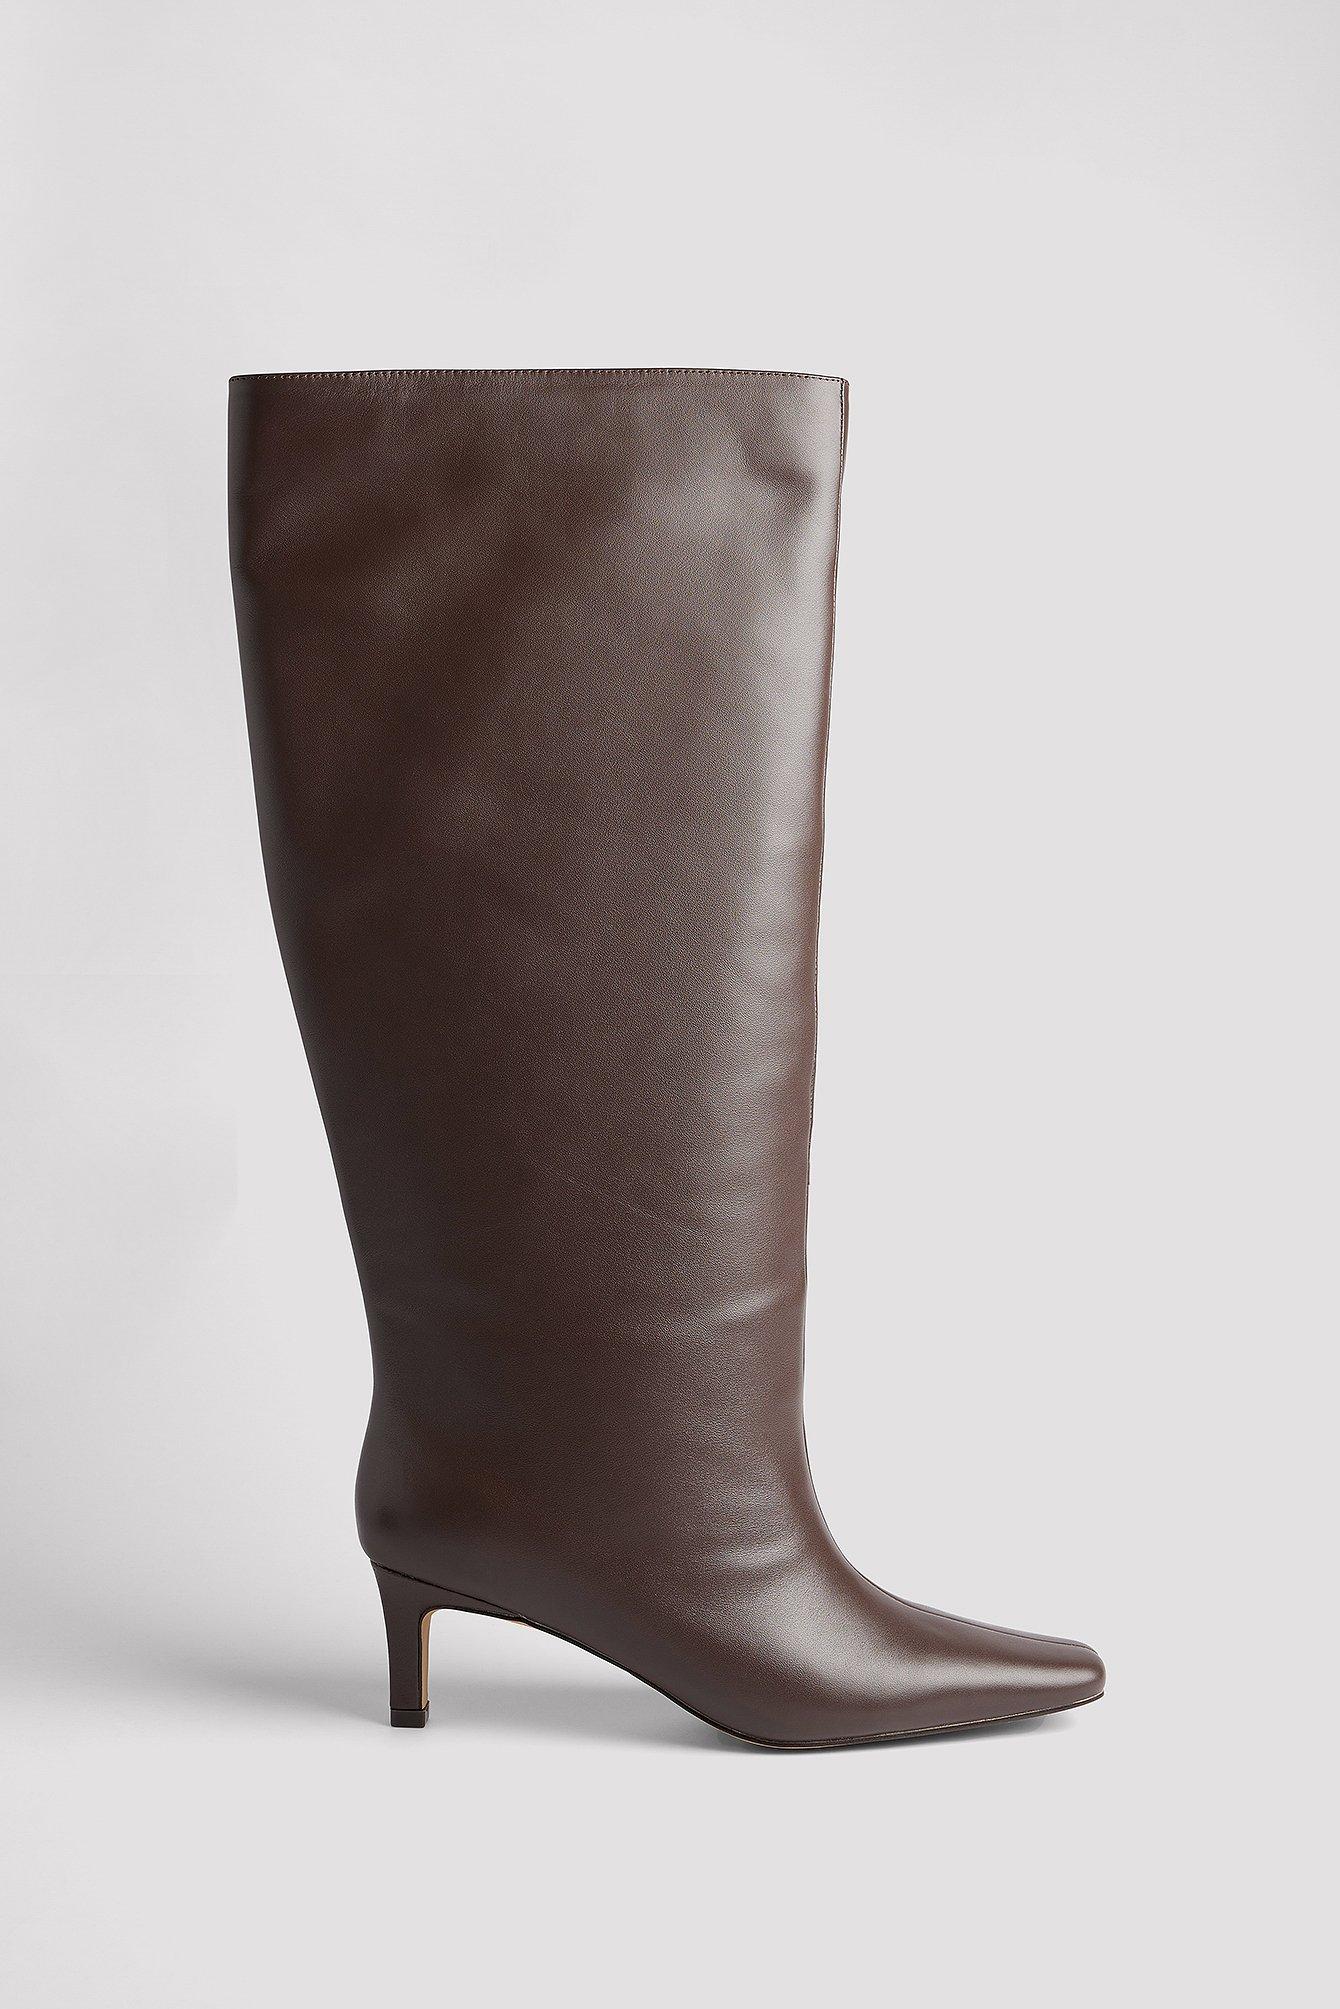 NA-KD Brown Leather Stiletto Wide Shaft Boots | Lyst